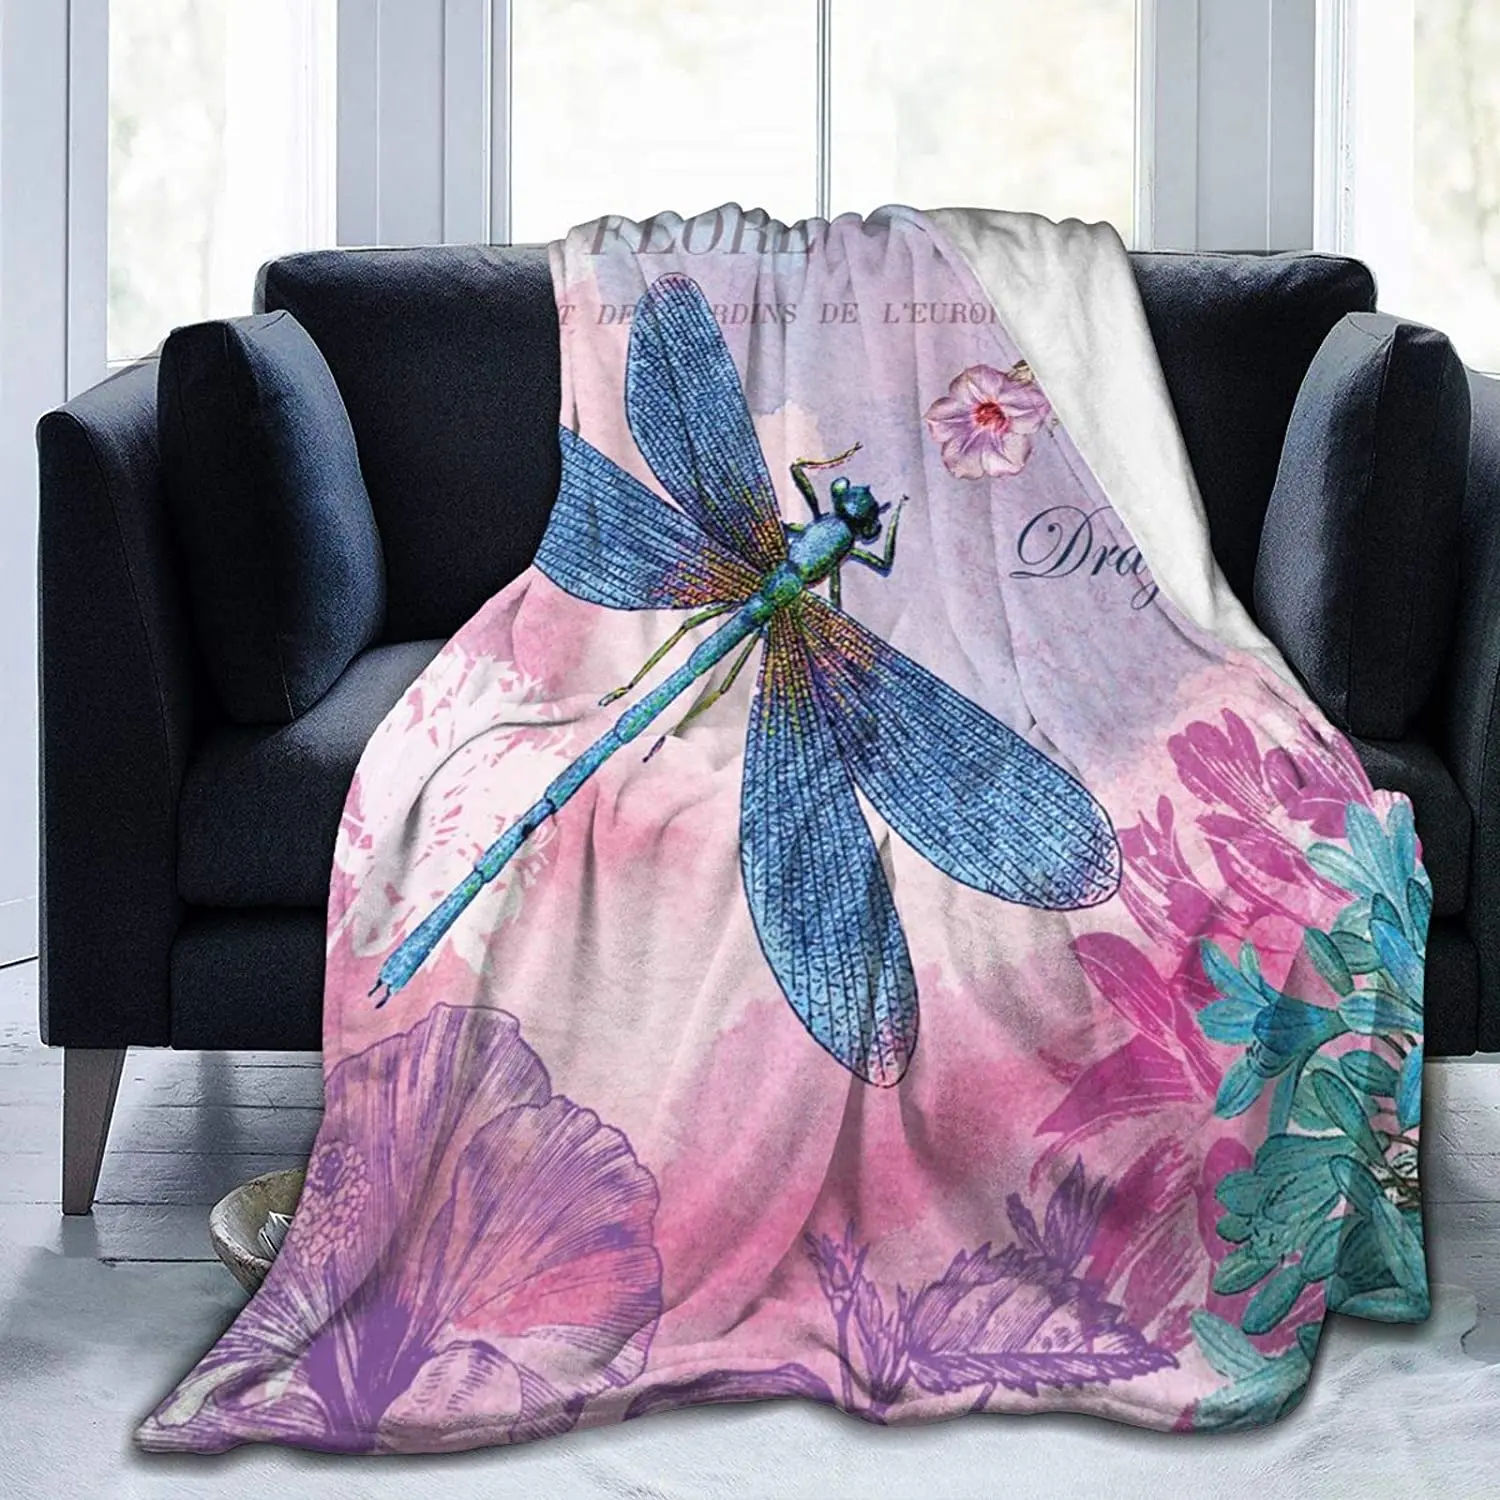 Comfort Throw Blankets Ultra Soft and Fluffy Blankets Throw Blankets Fall Winter and Spring - Pink Flower Dragonfly Blankets